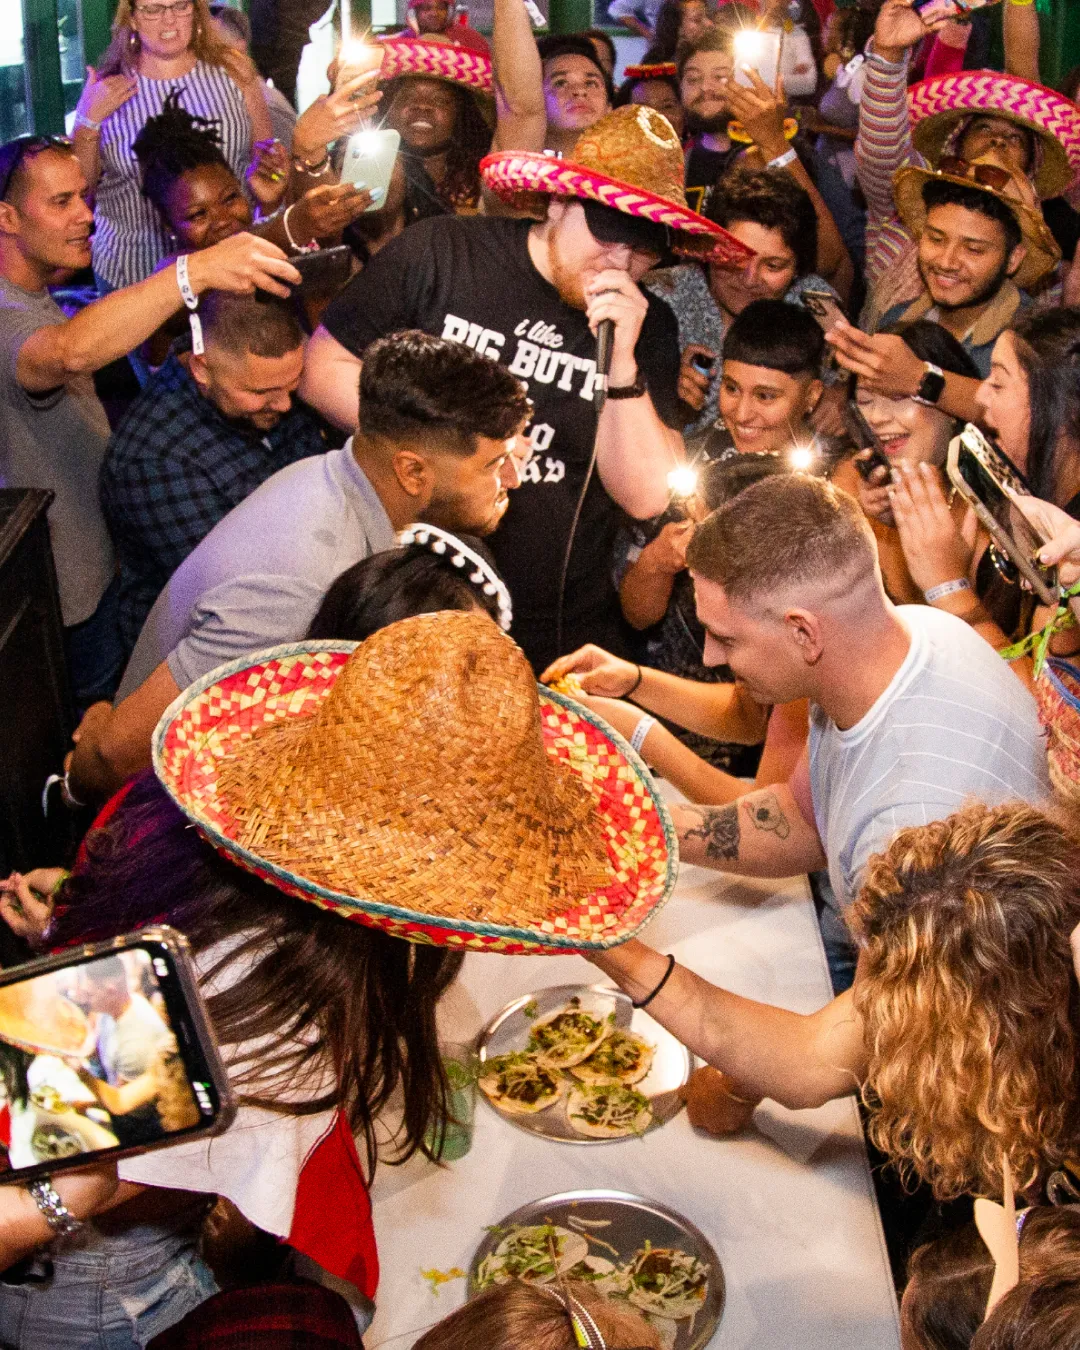 Vivacious people in sombreros gathered around a table with fierce devotion to the taco eating contest  capturing the heart and soul of the Tacos and Tequila-themed night
